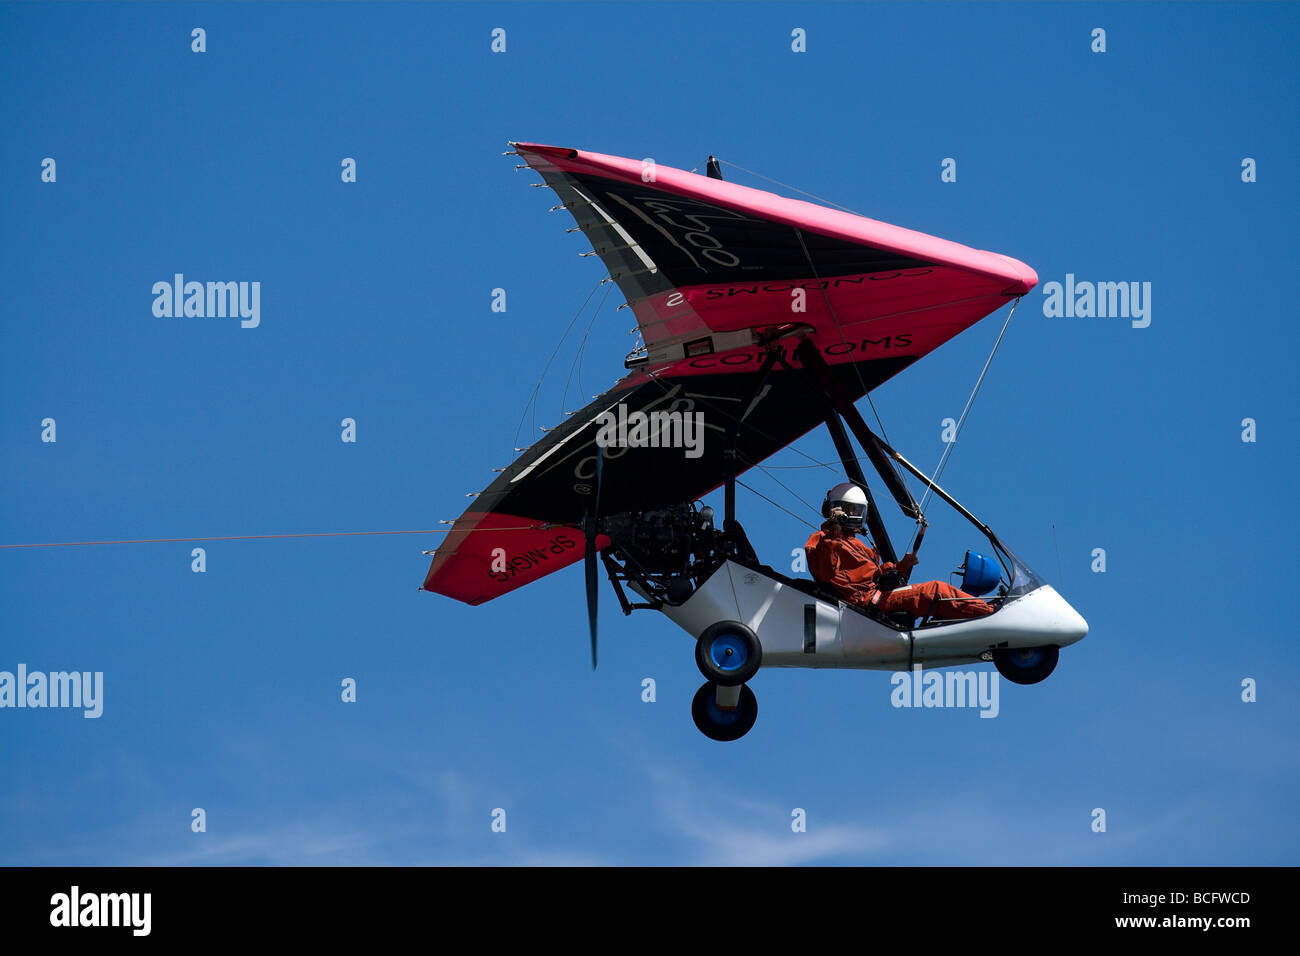 Photograph of Ultralight trike with condom ads on its wing,  flying on intense blue sky. Stock Photo